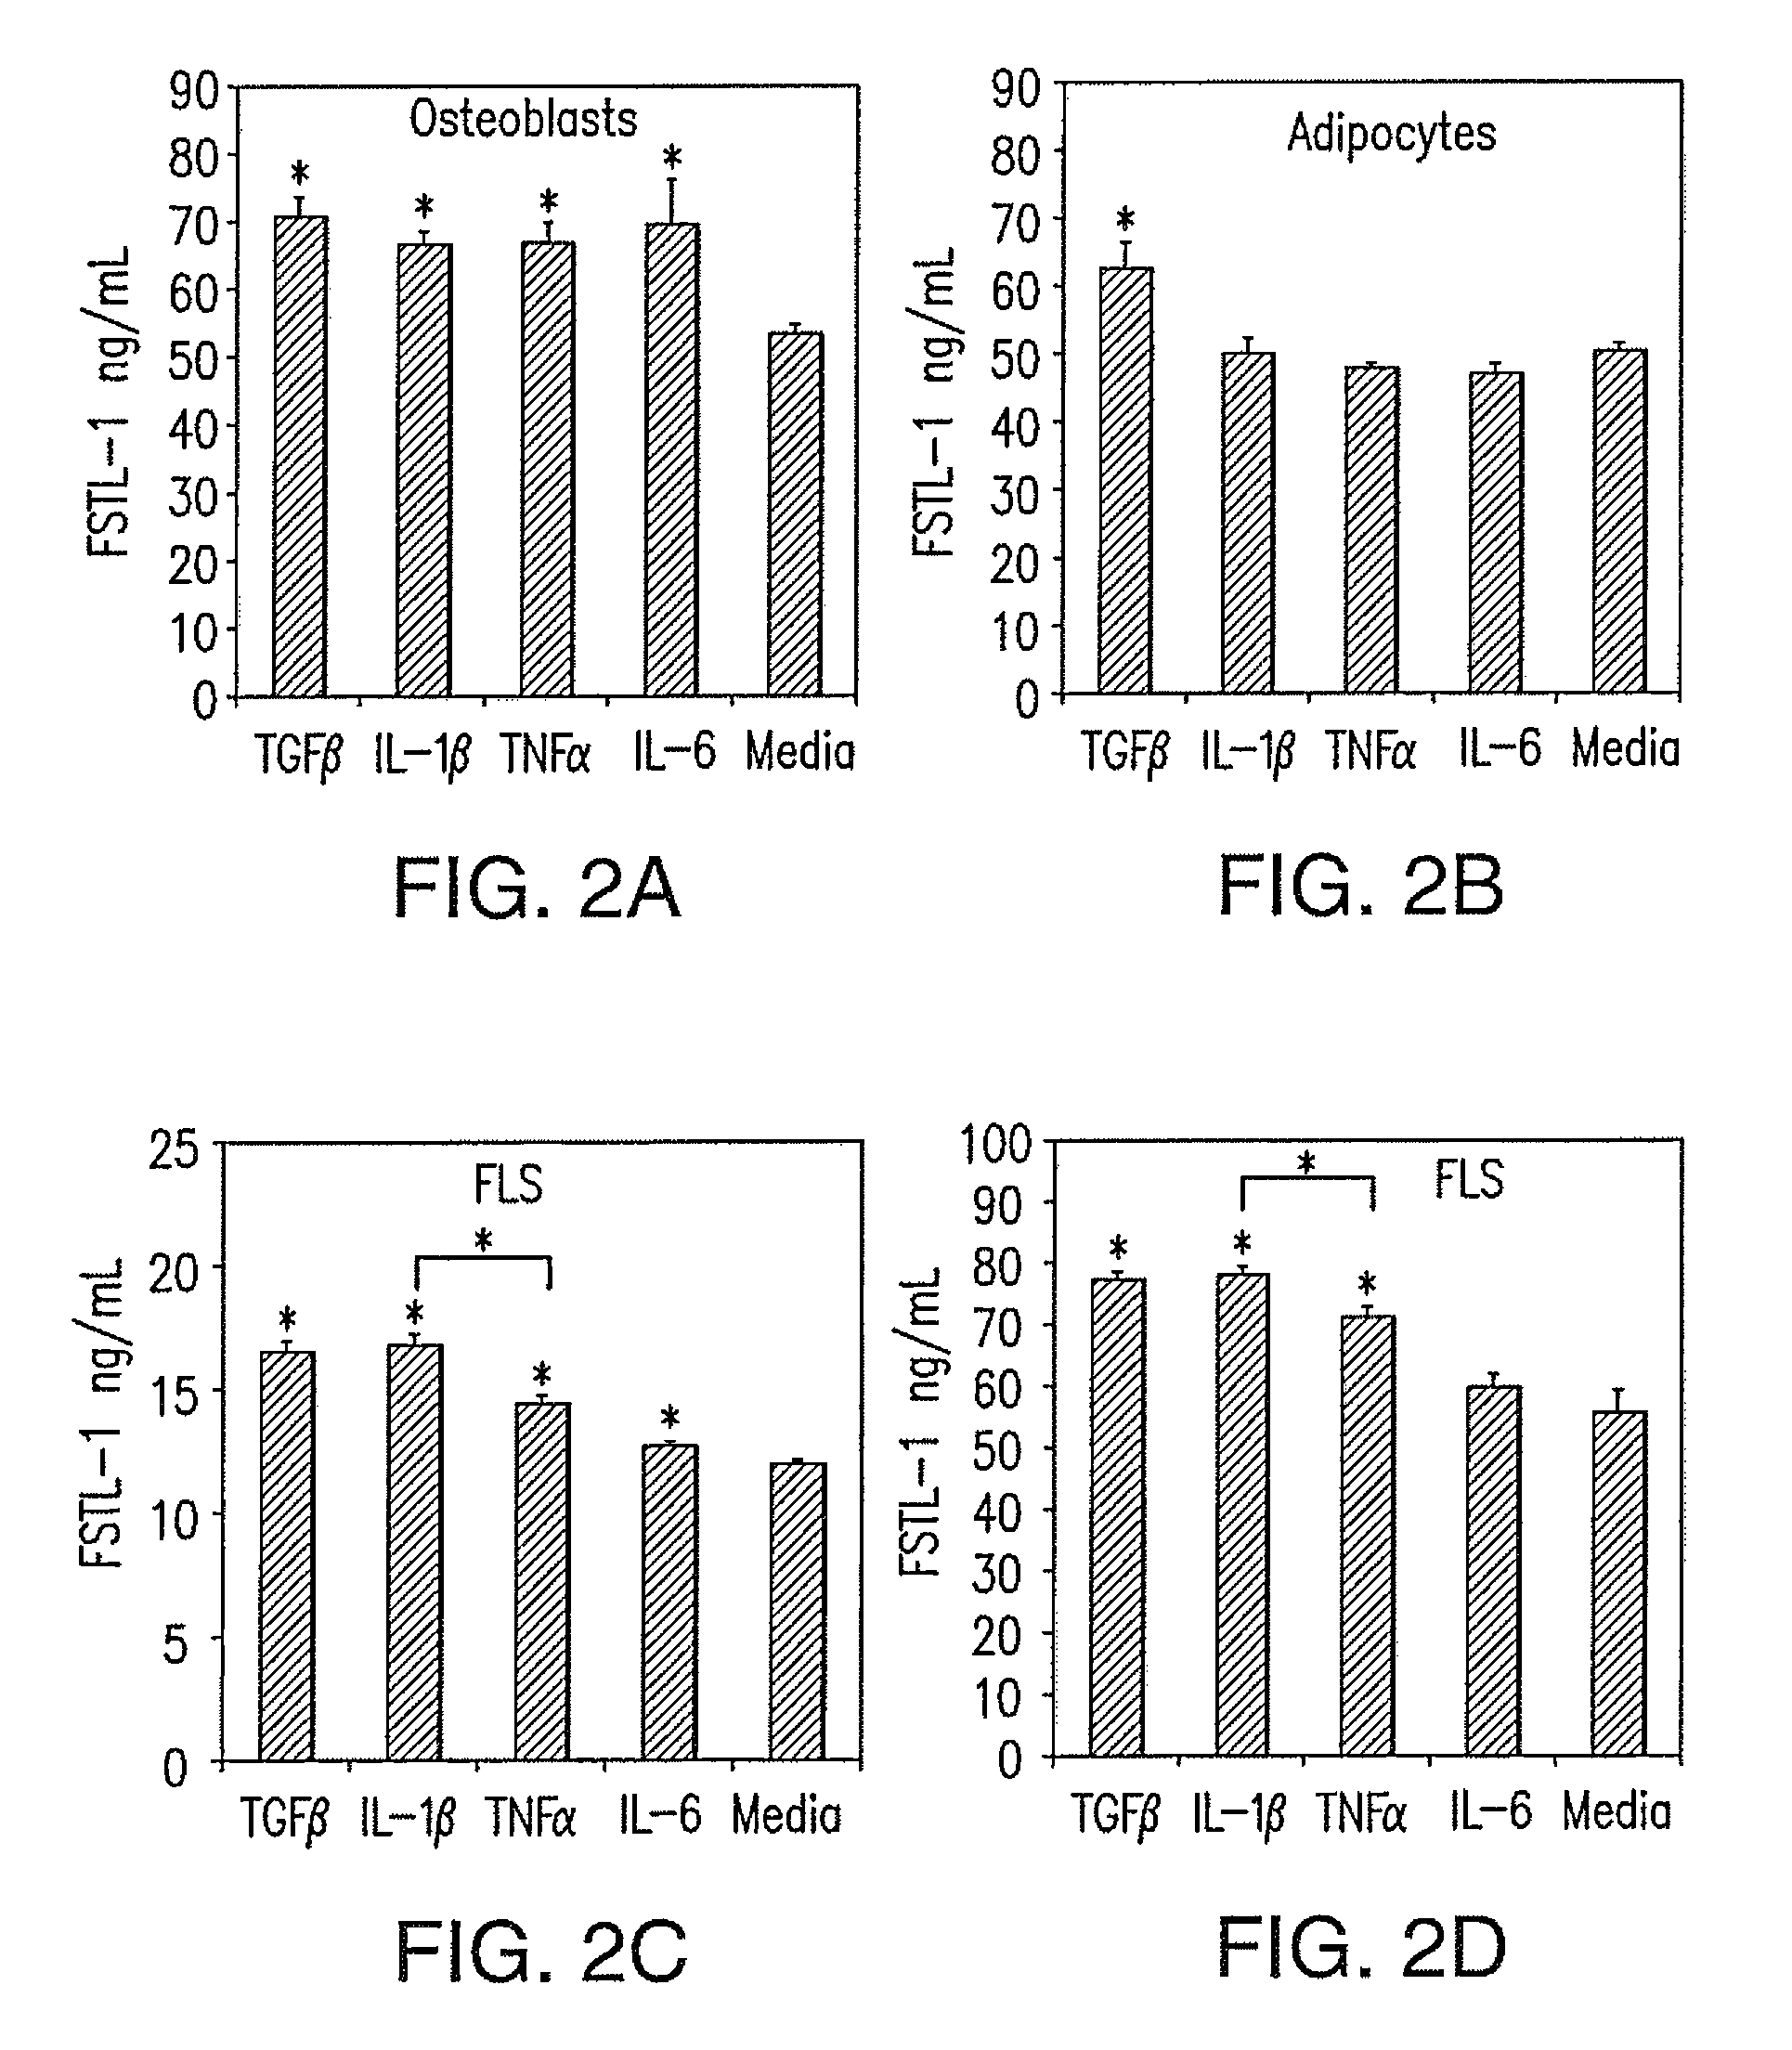 Follistatin-like protein-1 as a biomarker for inflammatory disorders